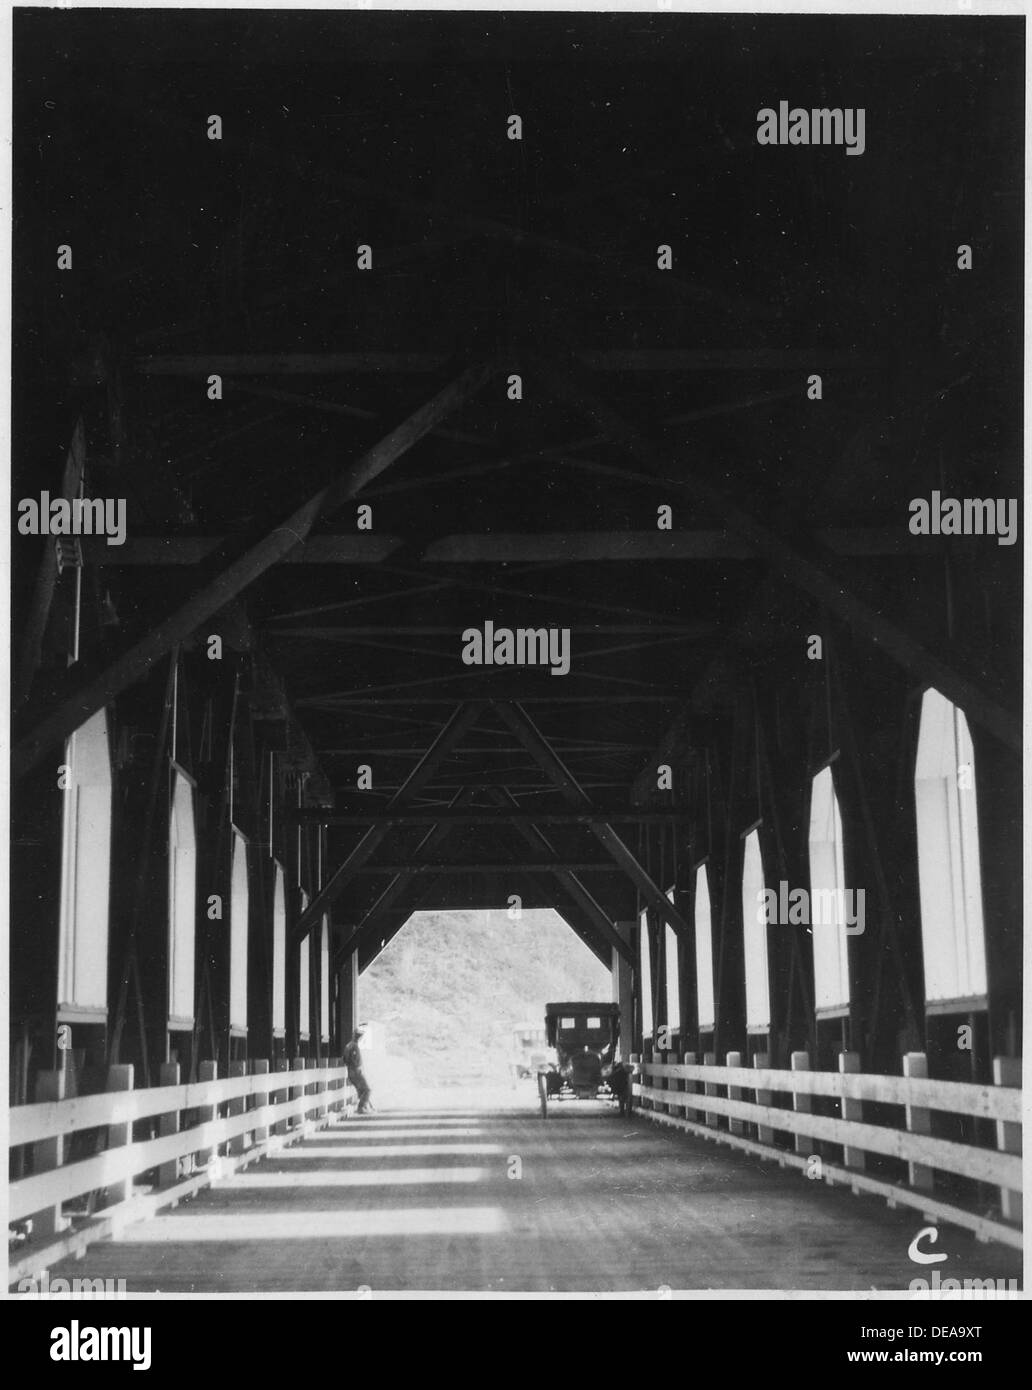 Alsea River Bridge, Station 60, Section 9. Looking through spans from South end. Shows stiff construction and well 298255 Stock Photo